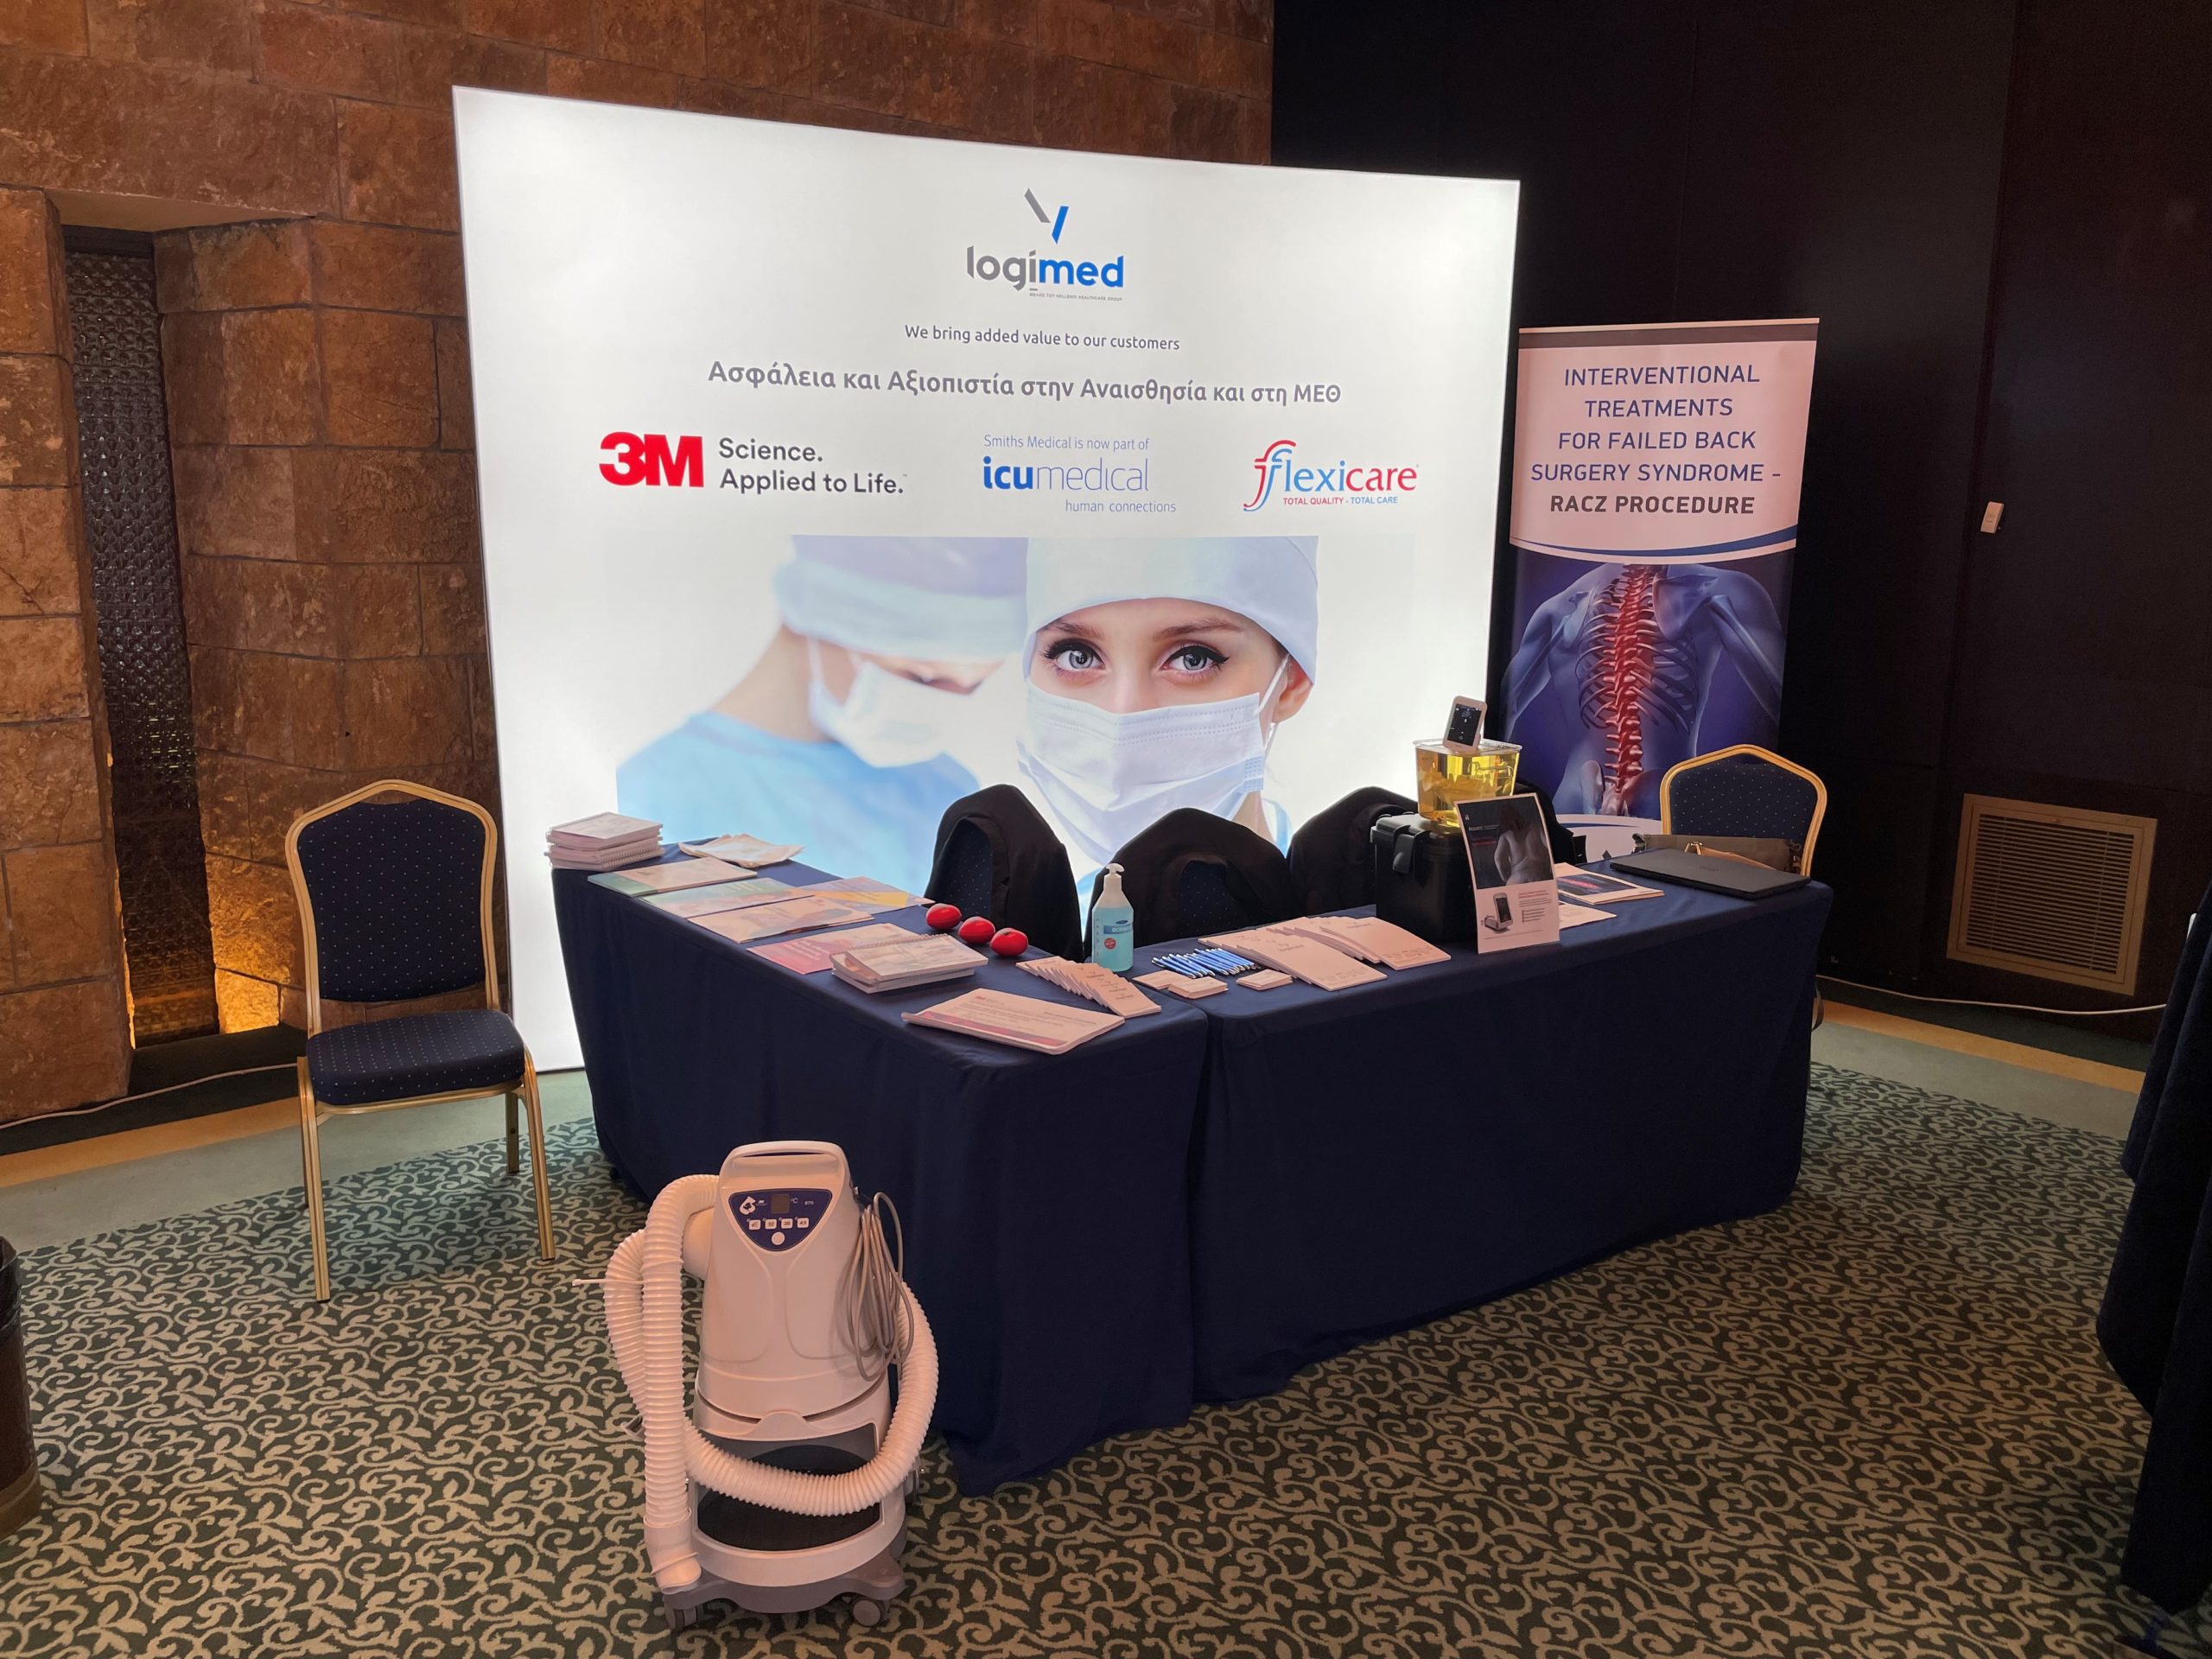 Y-Logimed attended the 25th Panhellenic Congress of Anesthesiology held in Corfu on May 11-13th.